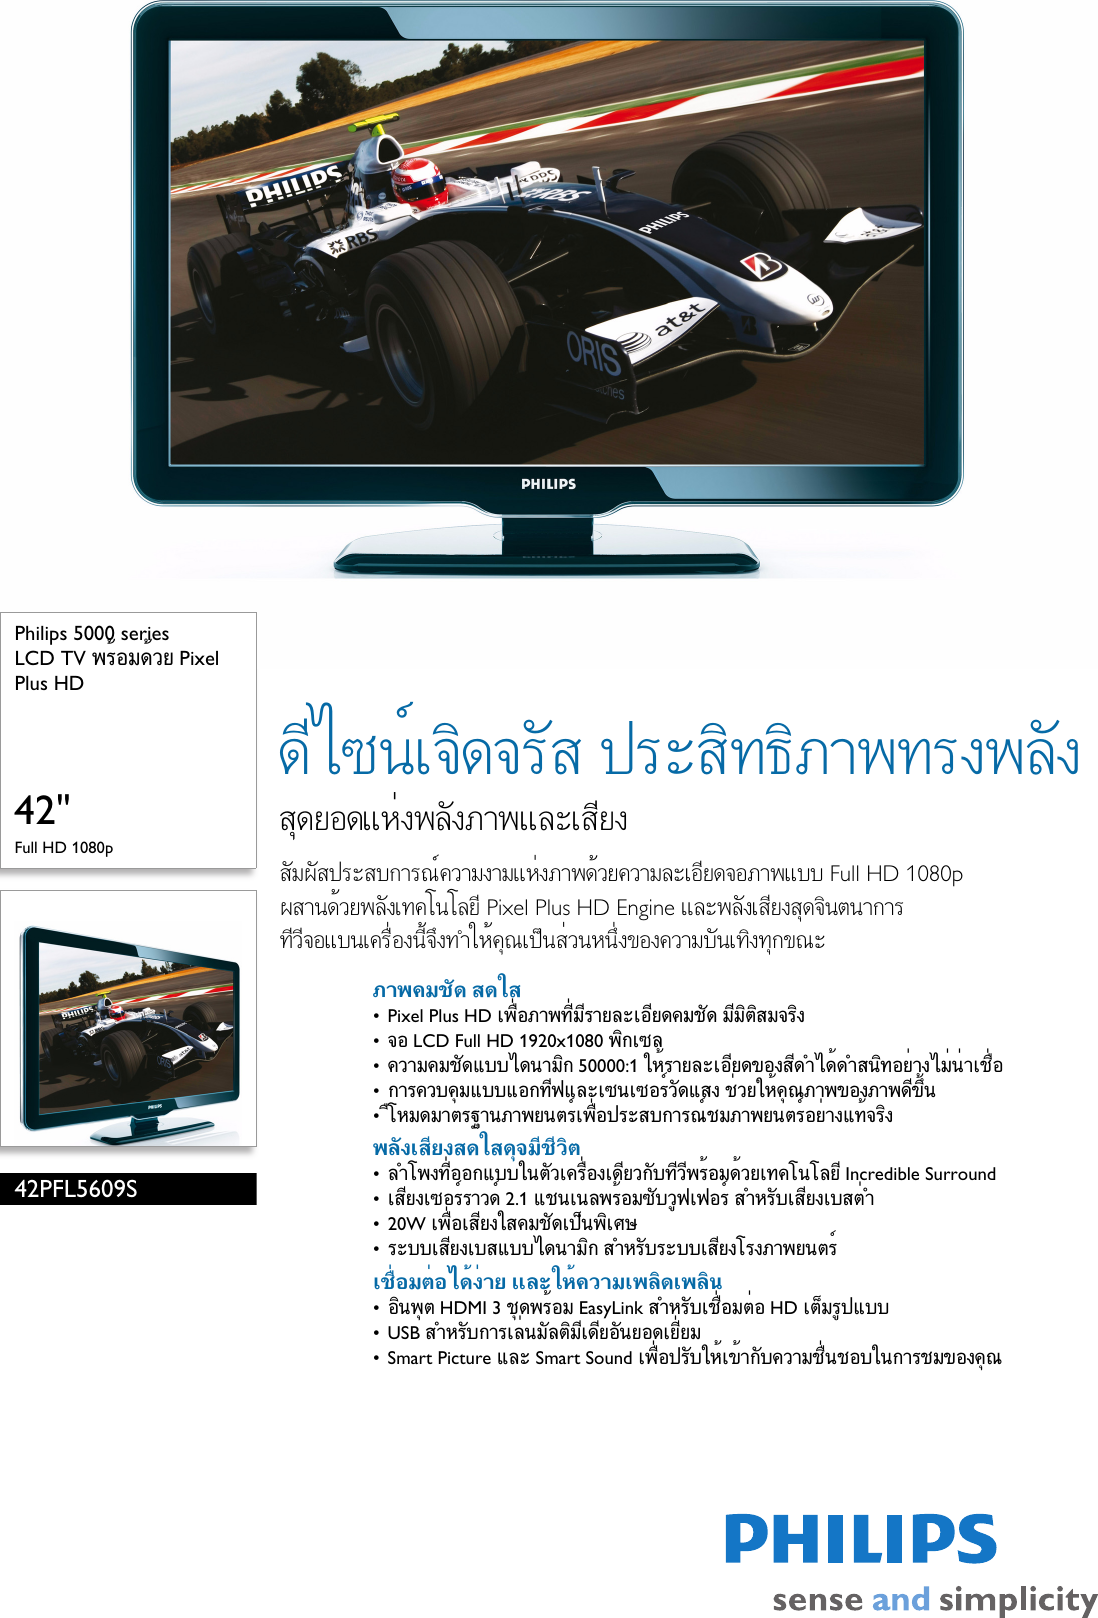 Page 1 of 3 - Philips Philips-42Pfl5609S-Users-Manual- 42PFL5609S/98 LCD TV พร้อมด้วย Pixel Plus HD  Philips-42pfl5609s-users-manual